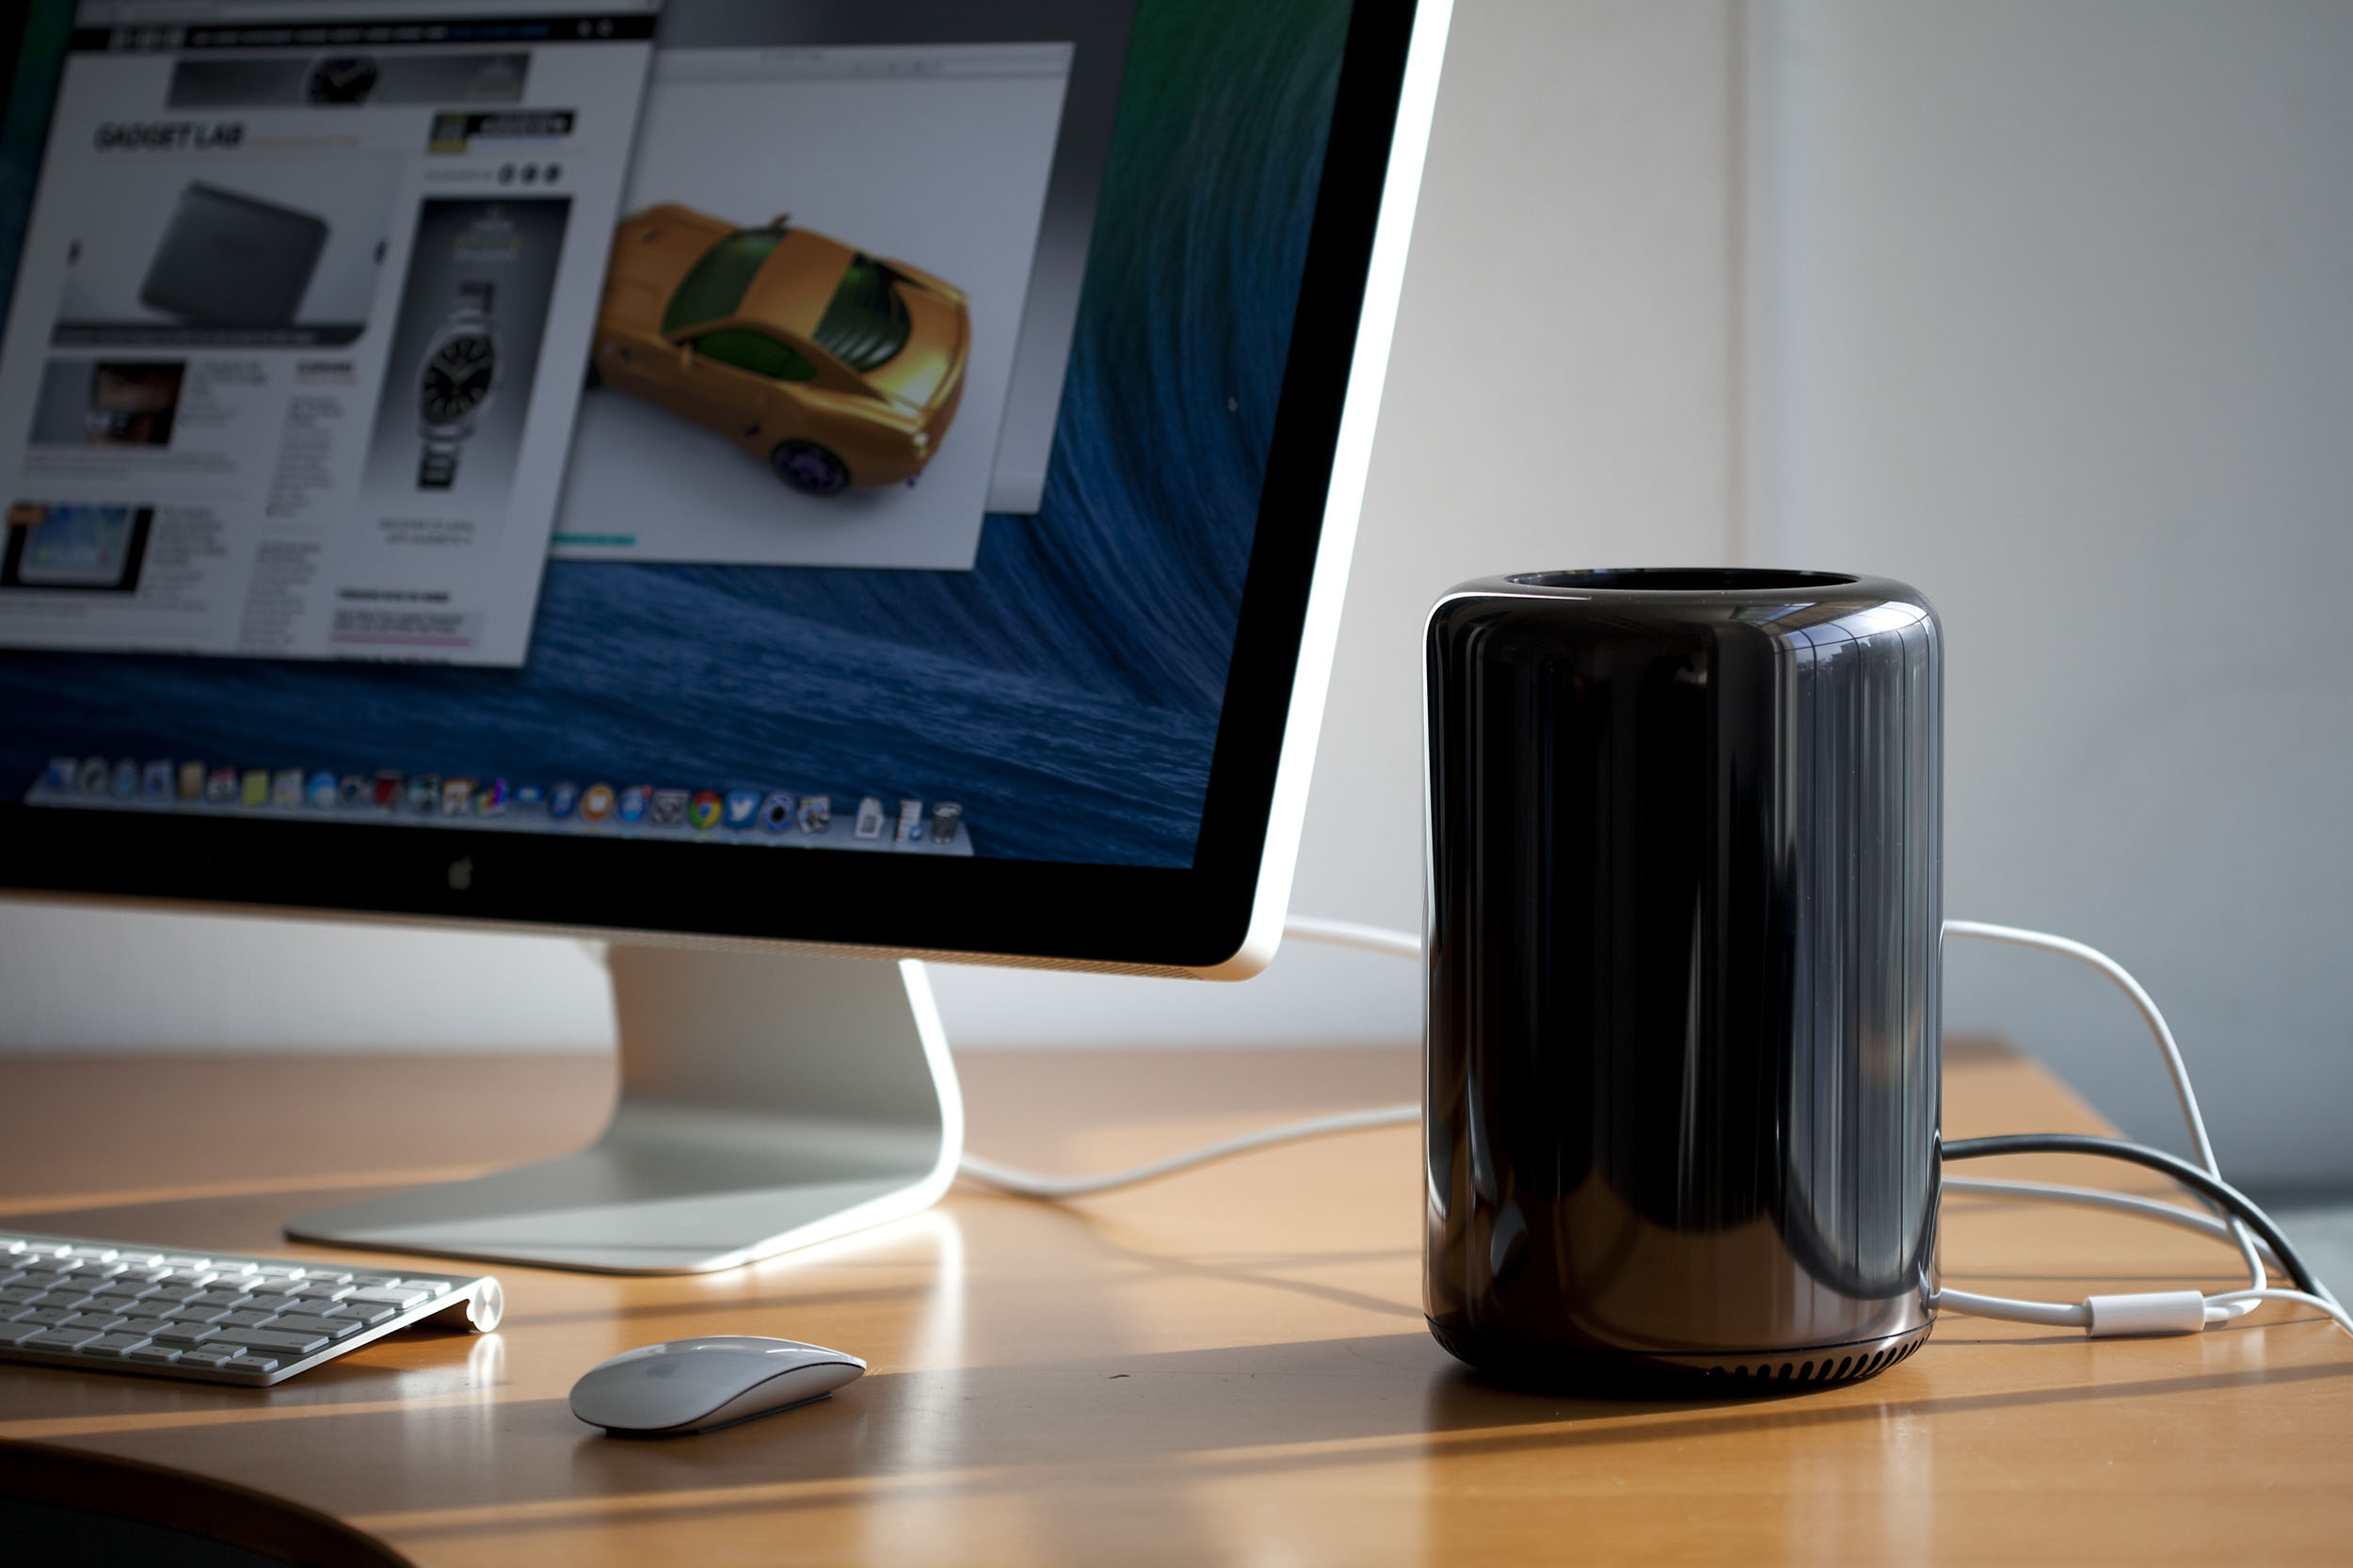 Apple plans to release an updated Mac Pro computer in 2019